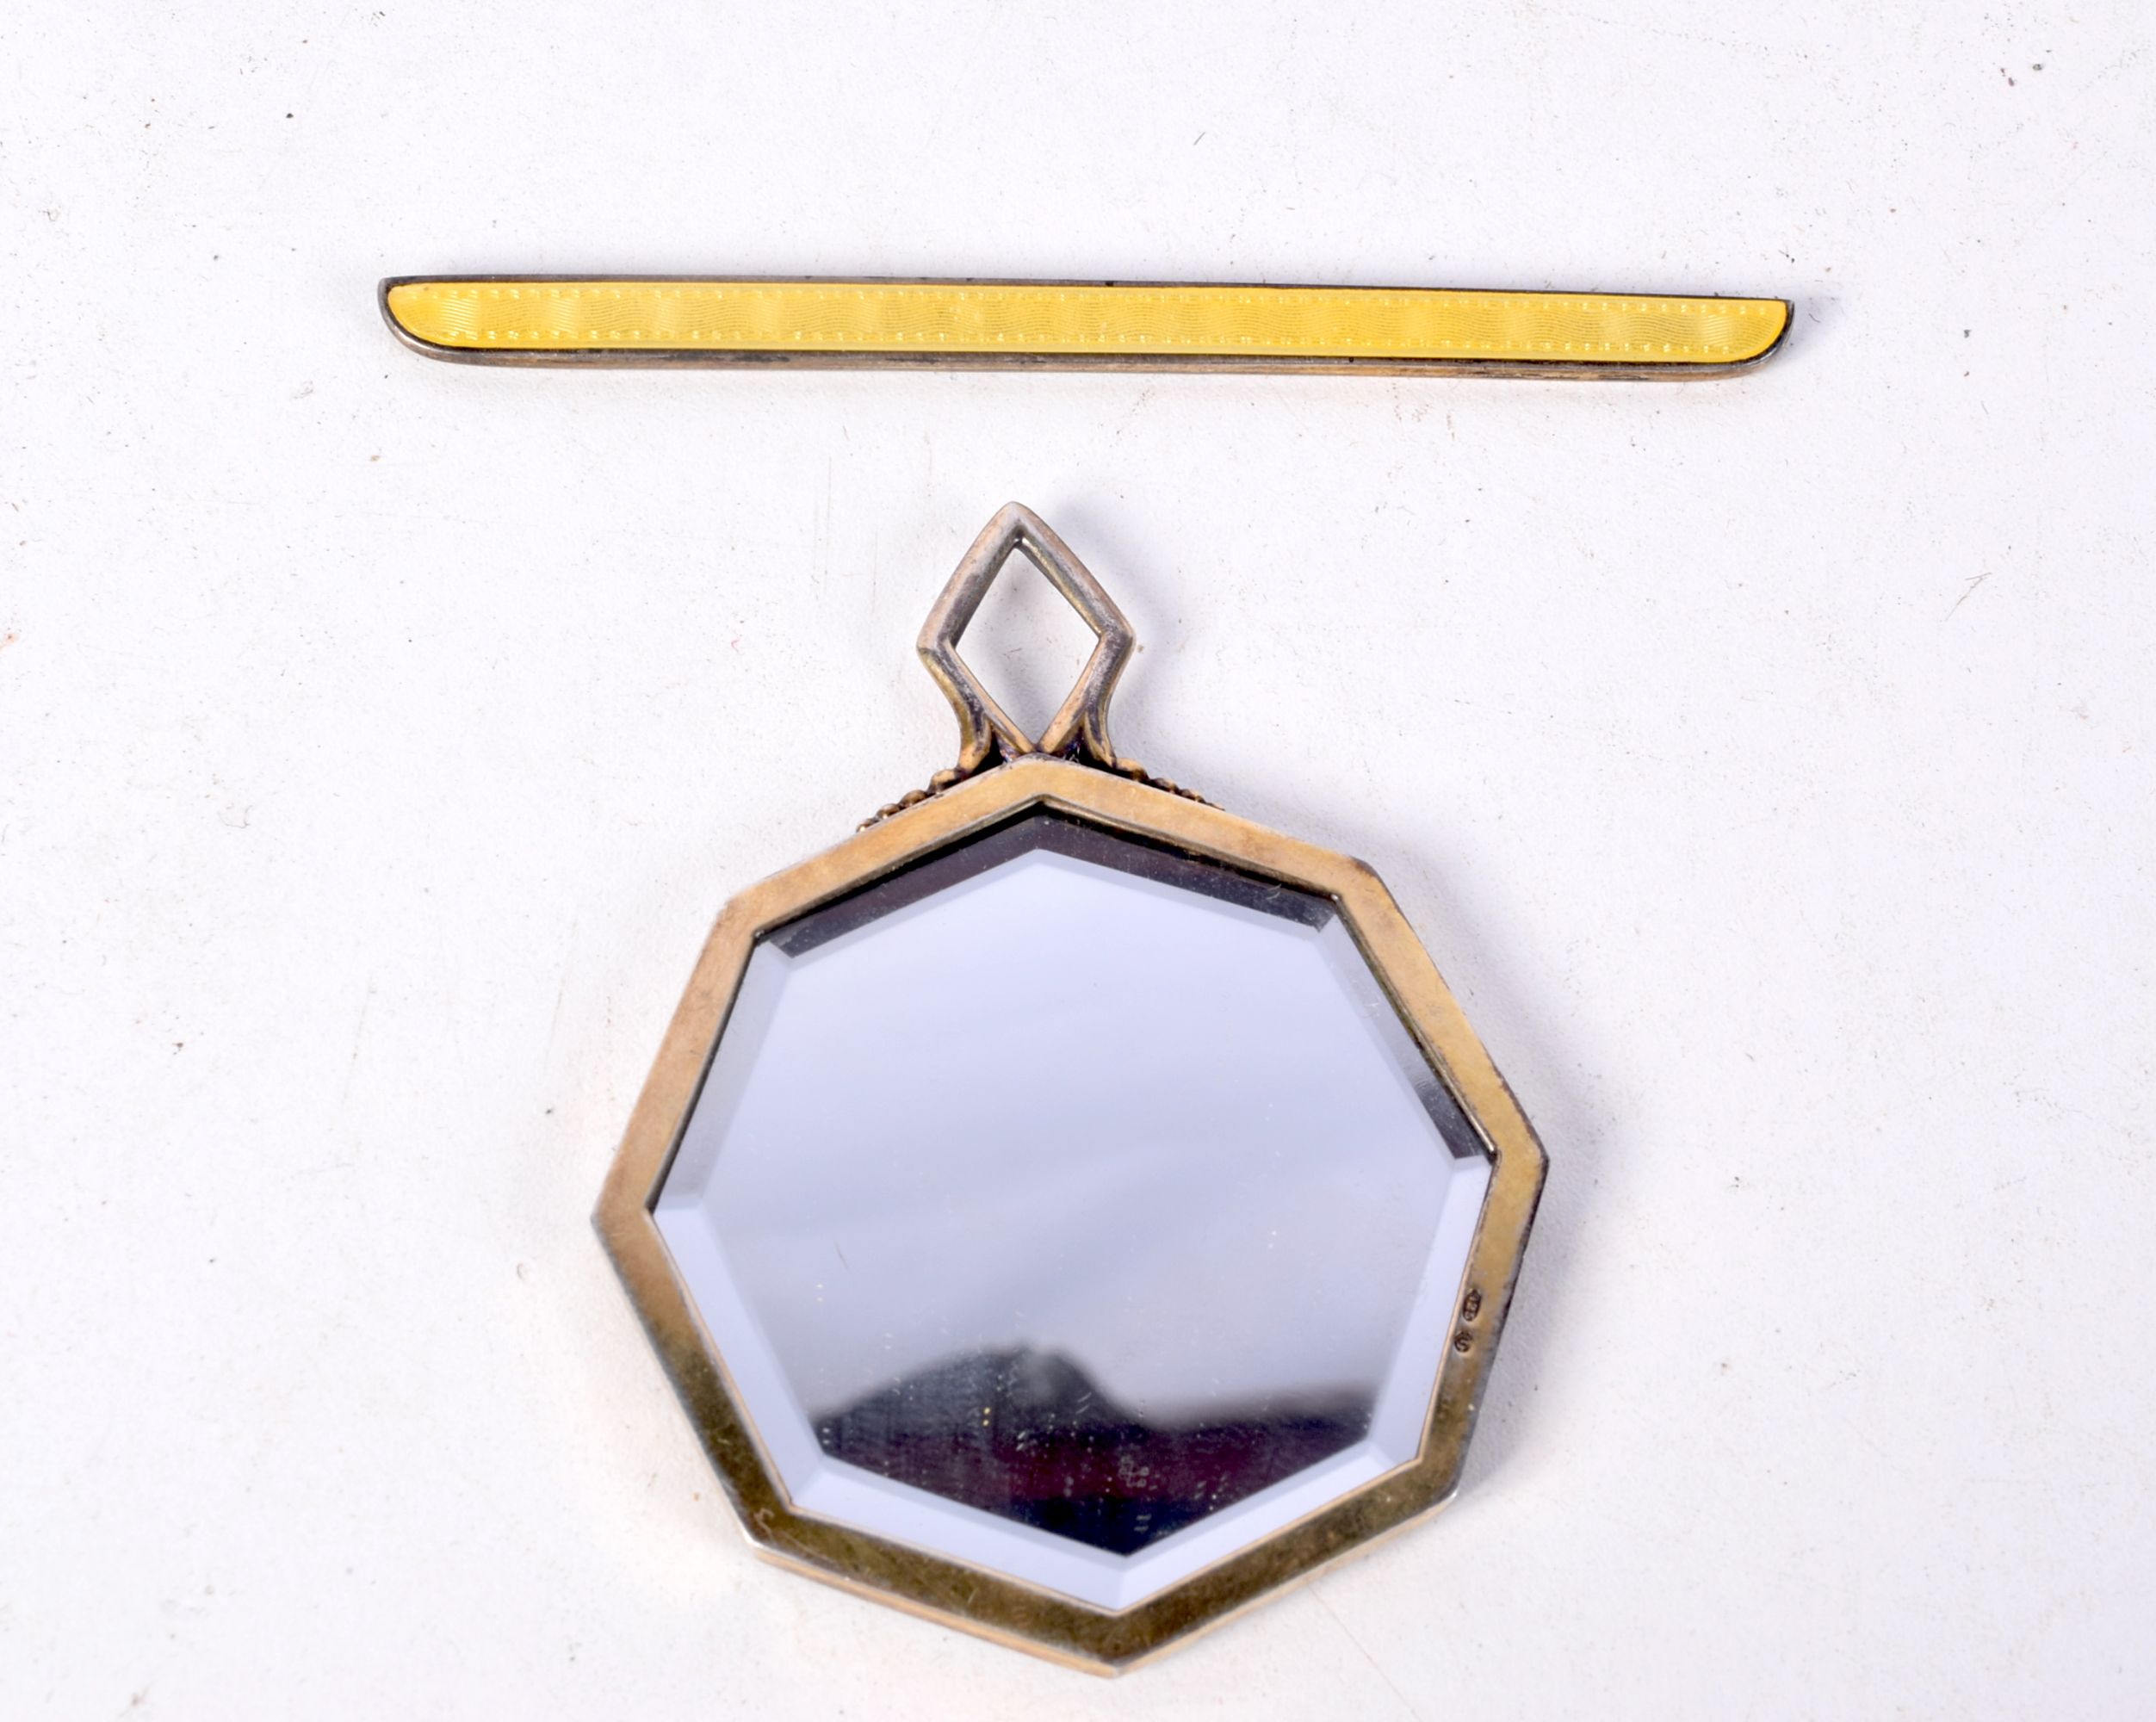 A small enamelled mirror together with a comb holder largest 11 cm (2).